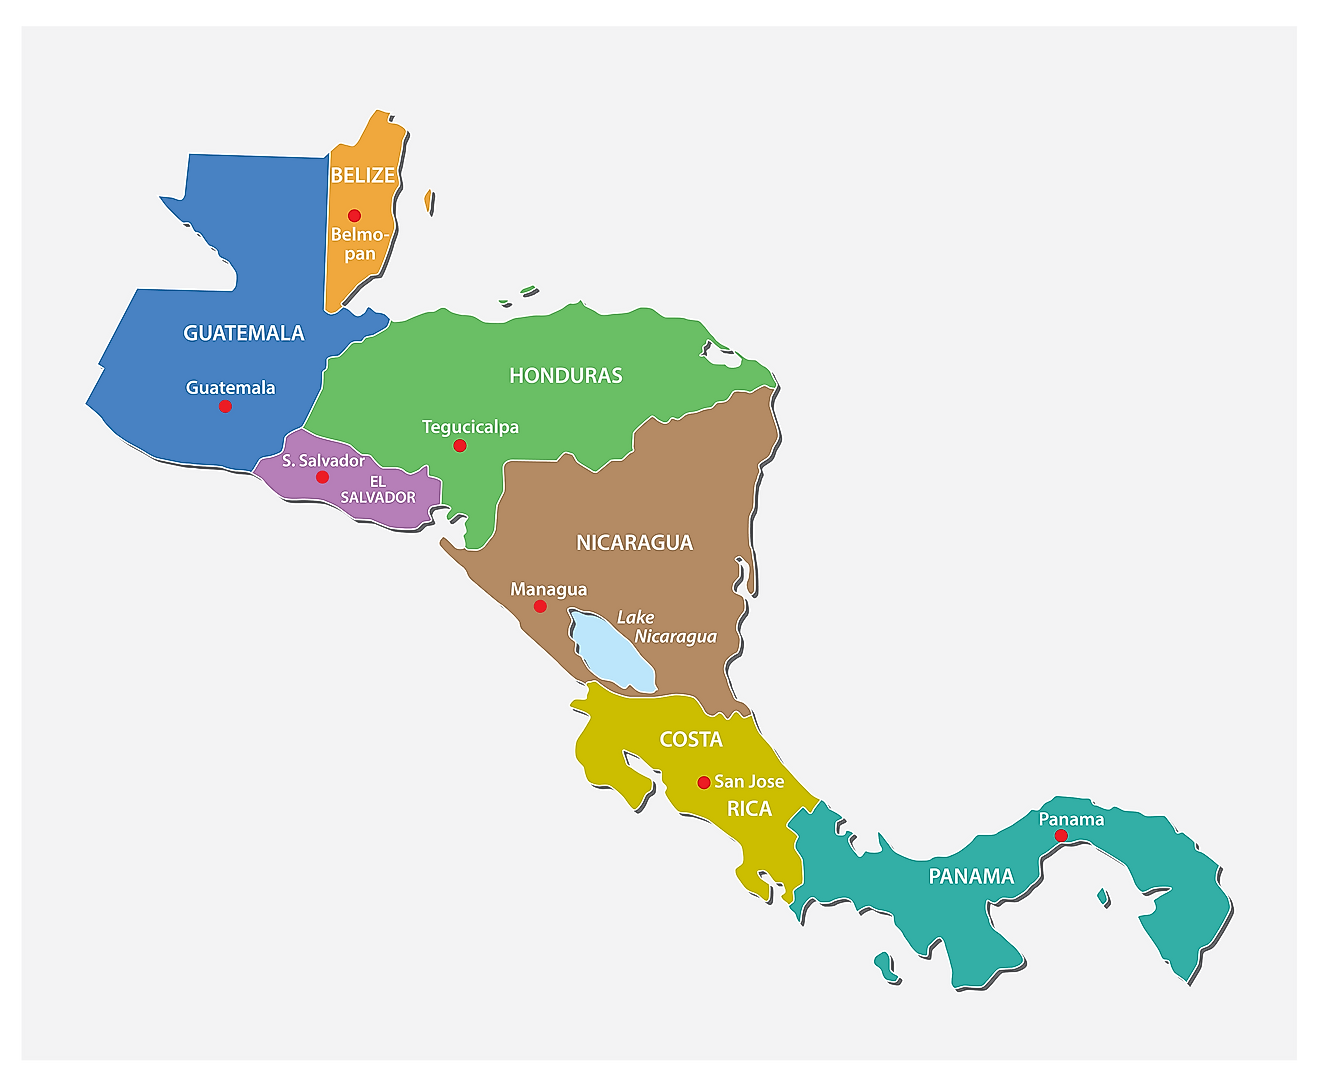 The 7 countries of Central America with their capital cities shown on the map.